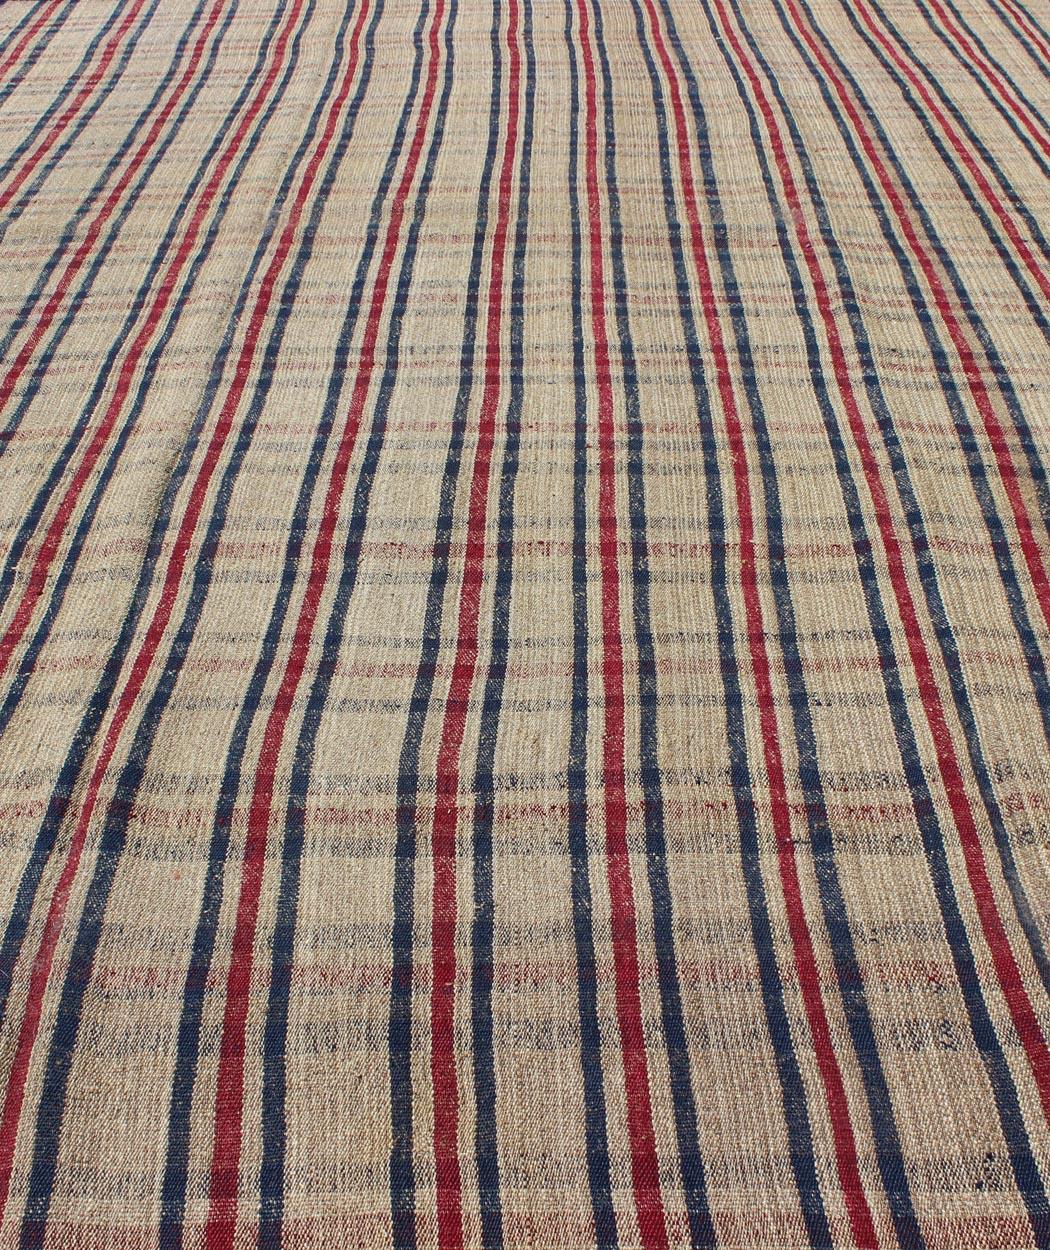 Plaid Design Vintage Turkish Kilim Rug with Stripes in Red, Navy Blue and Cream For Sale 3